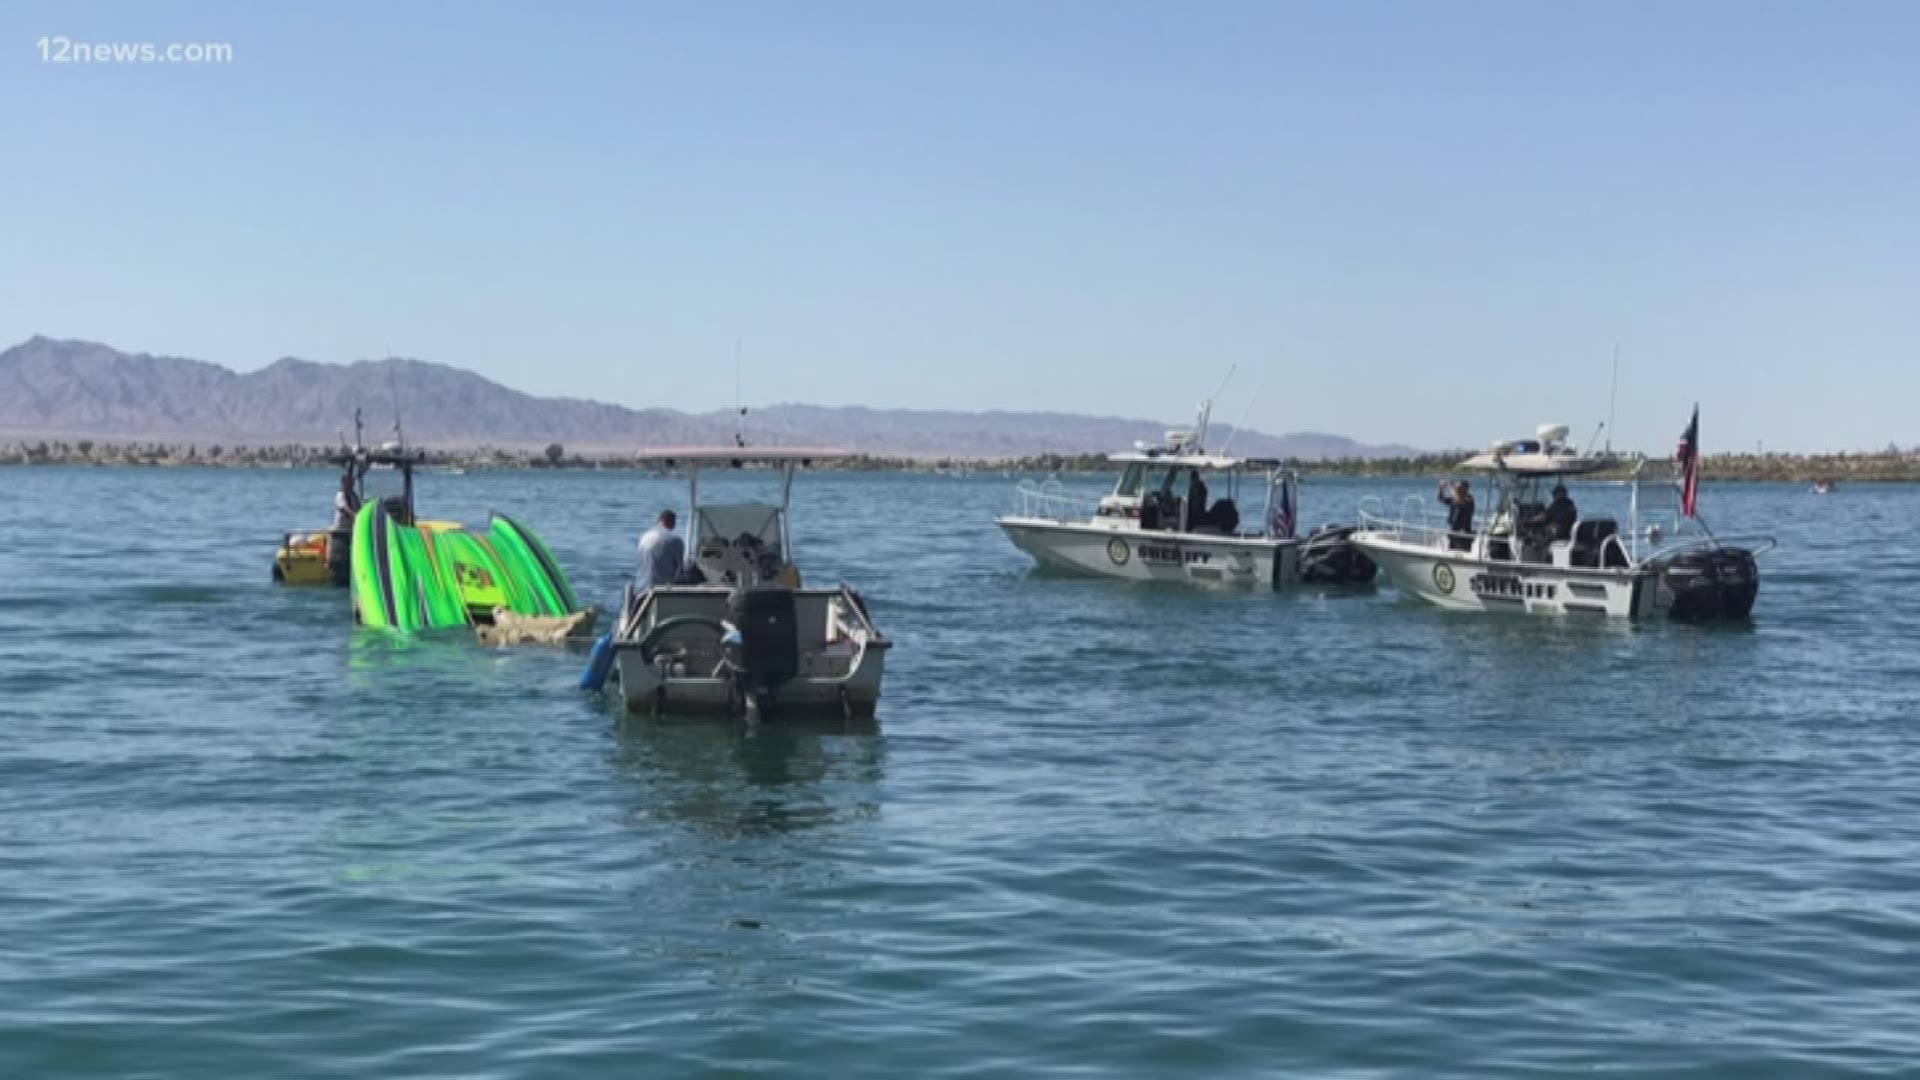 Authorities say two men are dead and one woman is in critical condition after a boat crash on Lake Havasu Saturday.